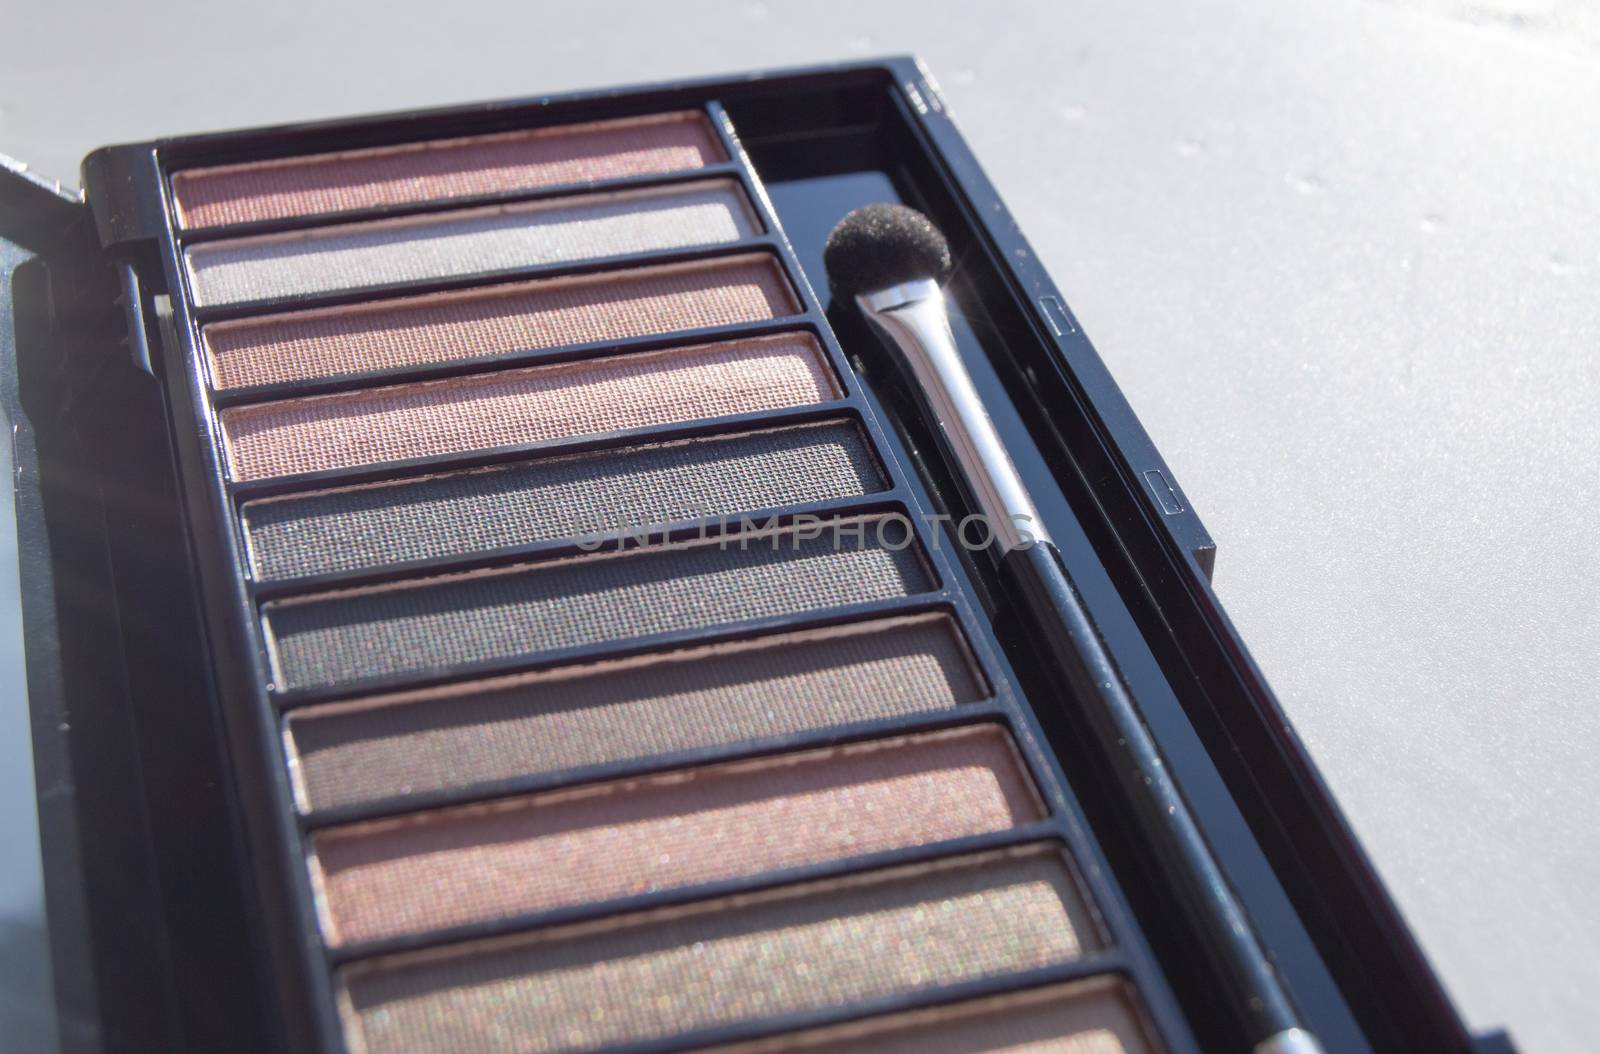 Eye shadow in a palette of brown and Nude shades with a makeup brush.